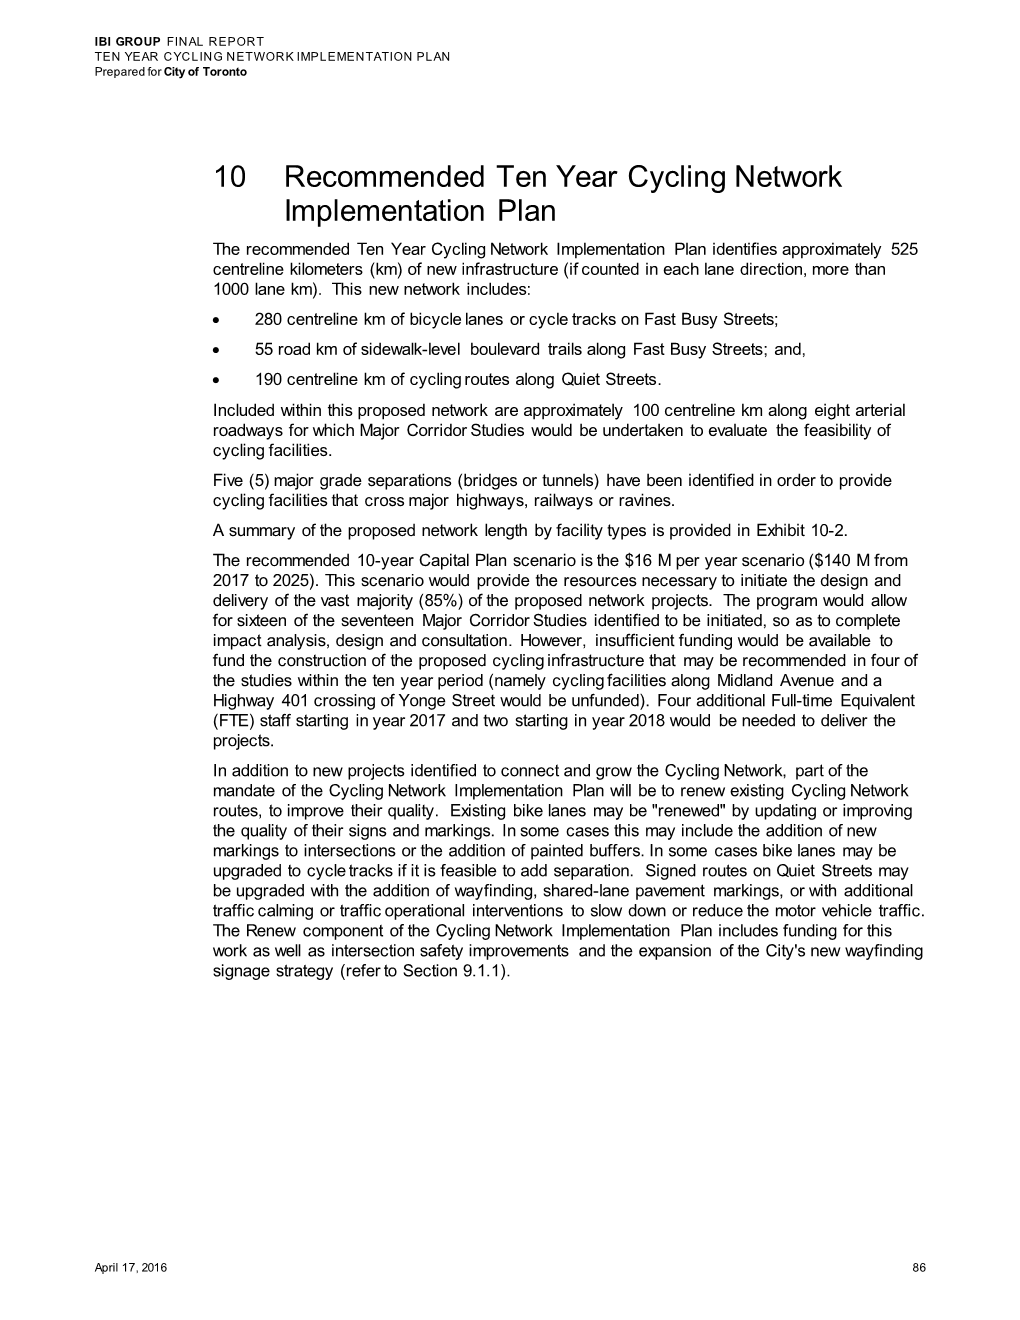 10 Recommended Ten Year Cycling Network Implementation Plan